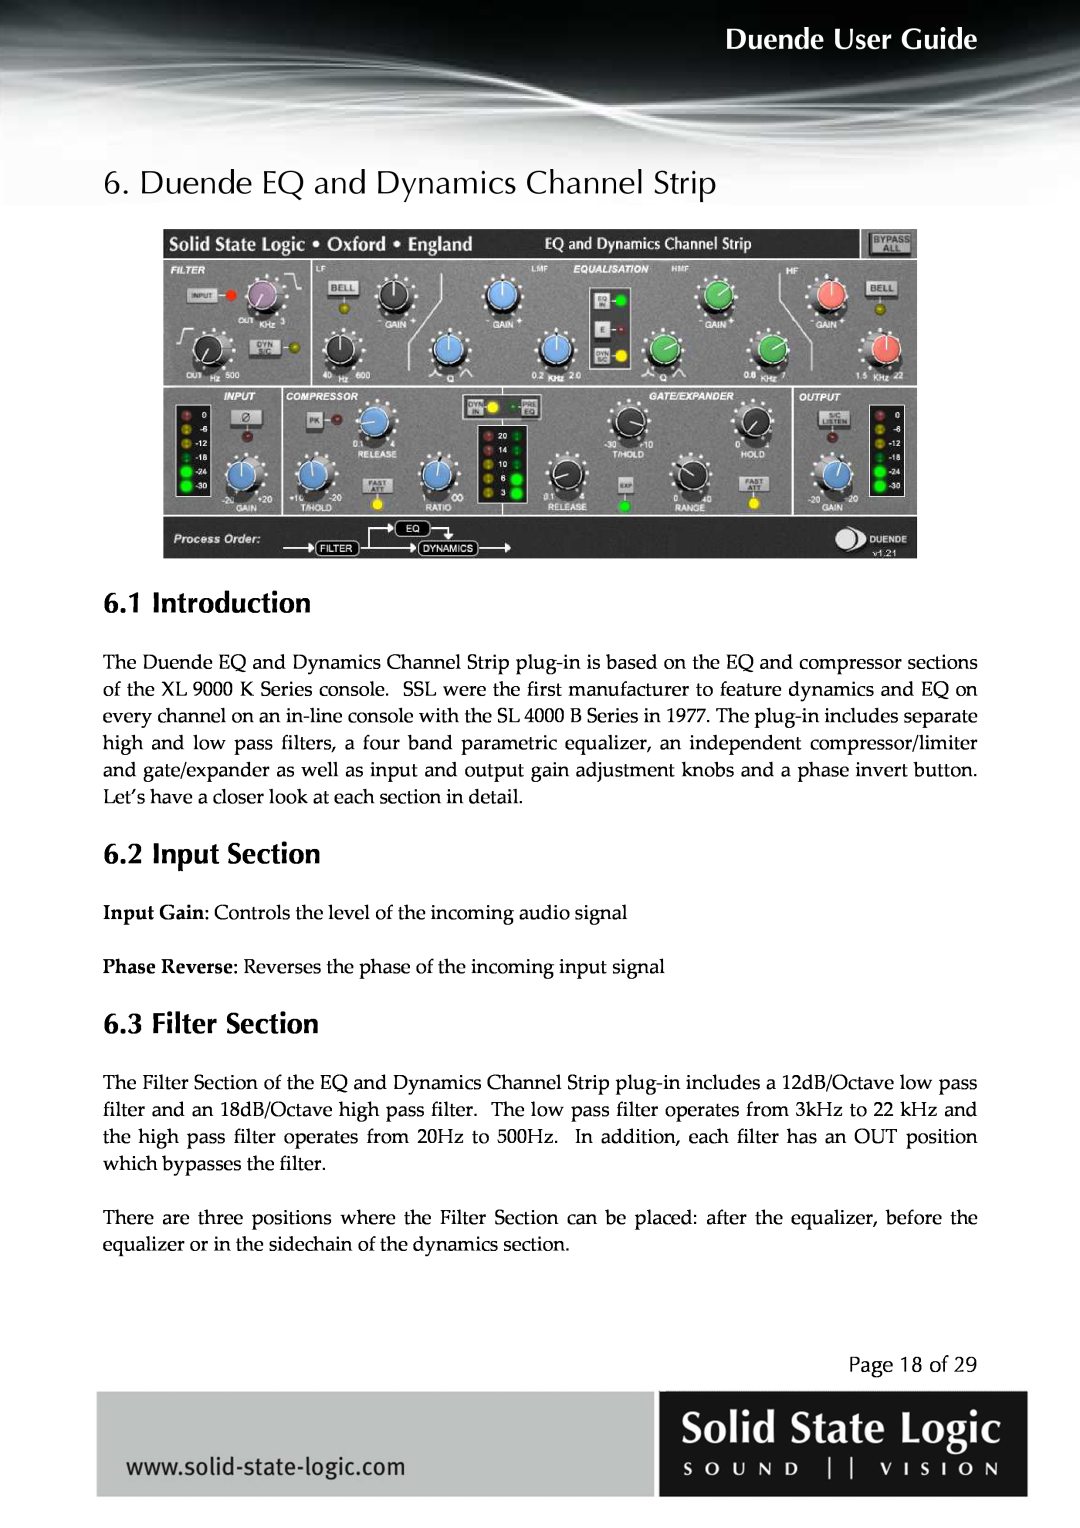 Solid State Logic DUENDE Duende EQ and Dynamics Channel Strip, Introduction, Input Section, Filter Section, Page 18 of 